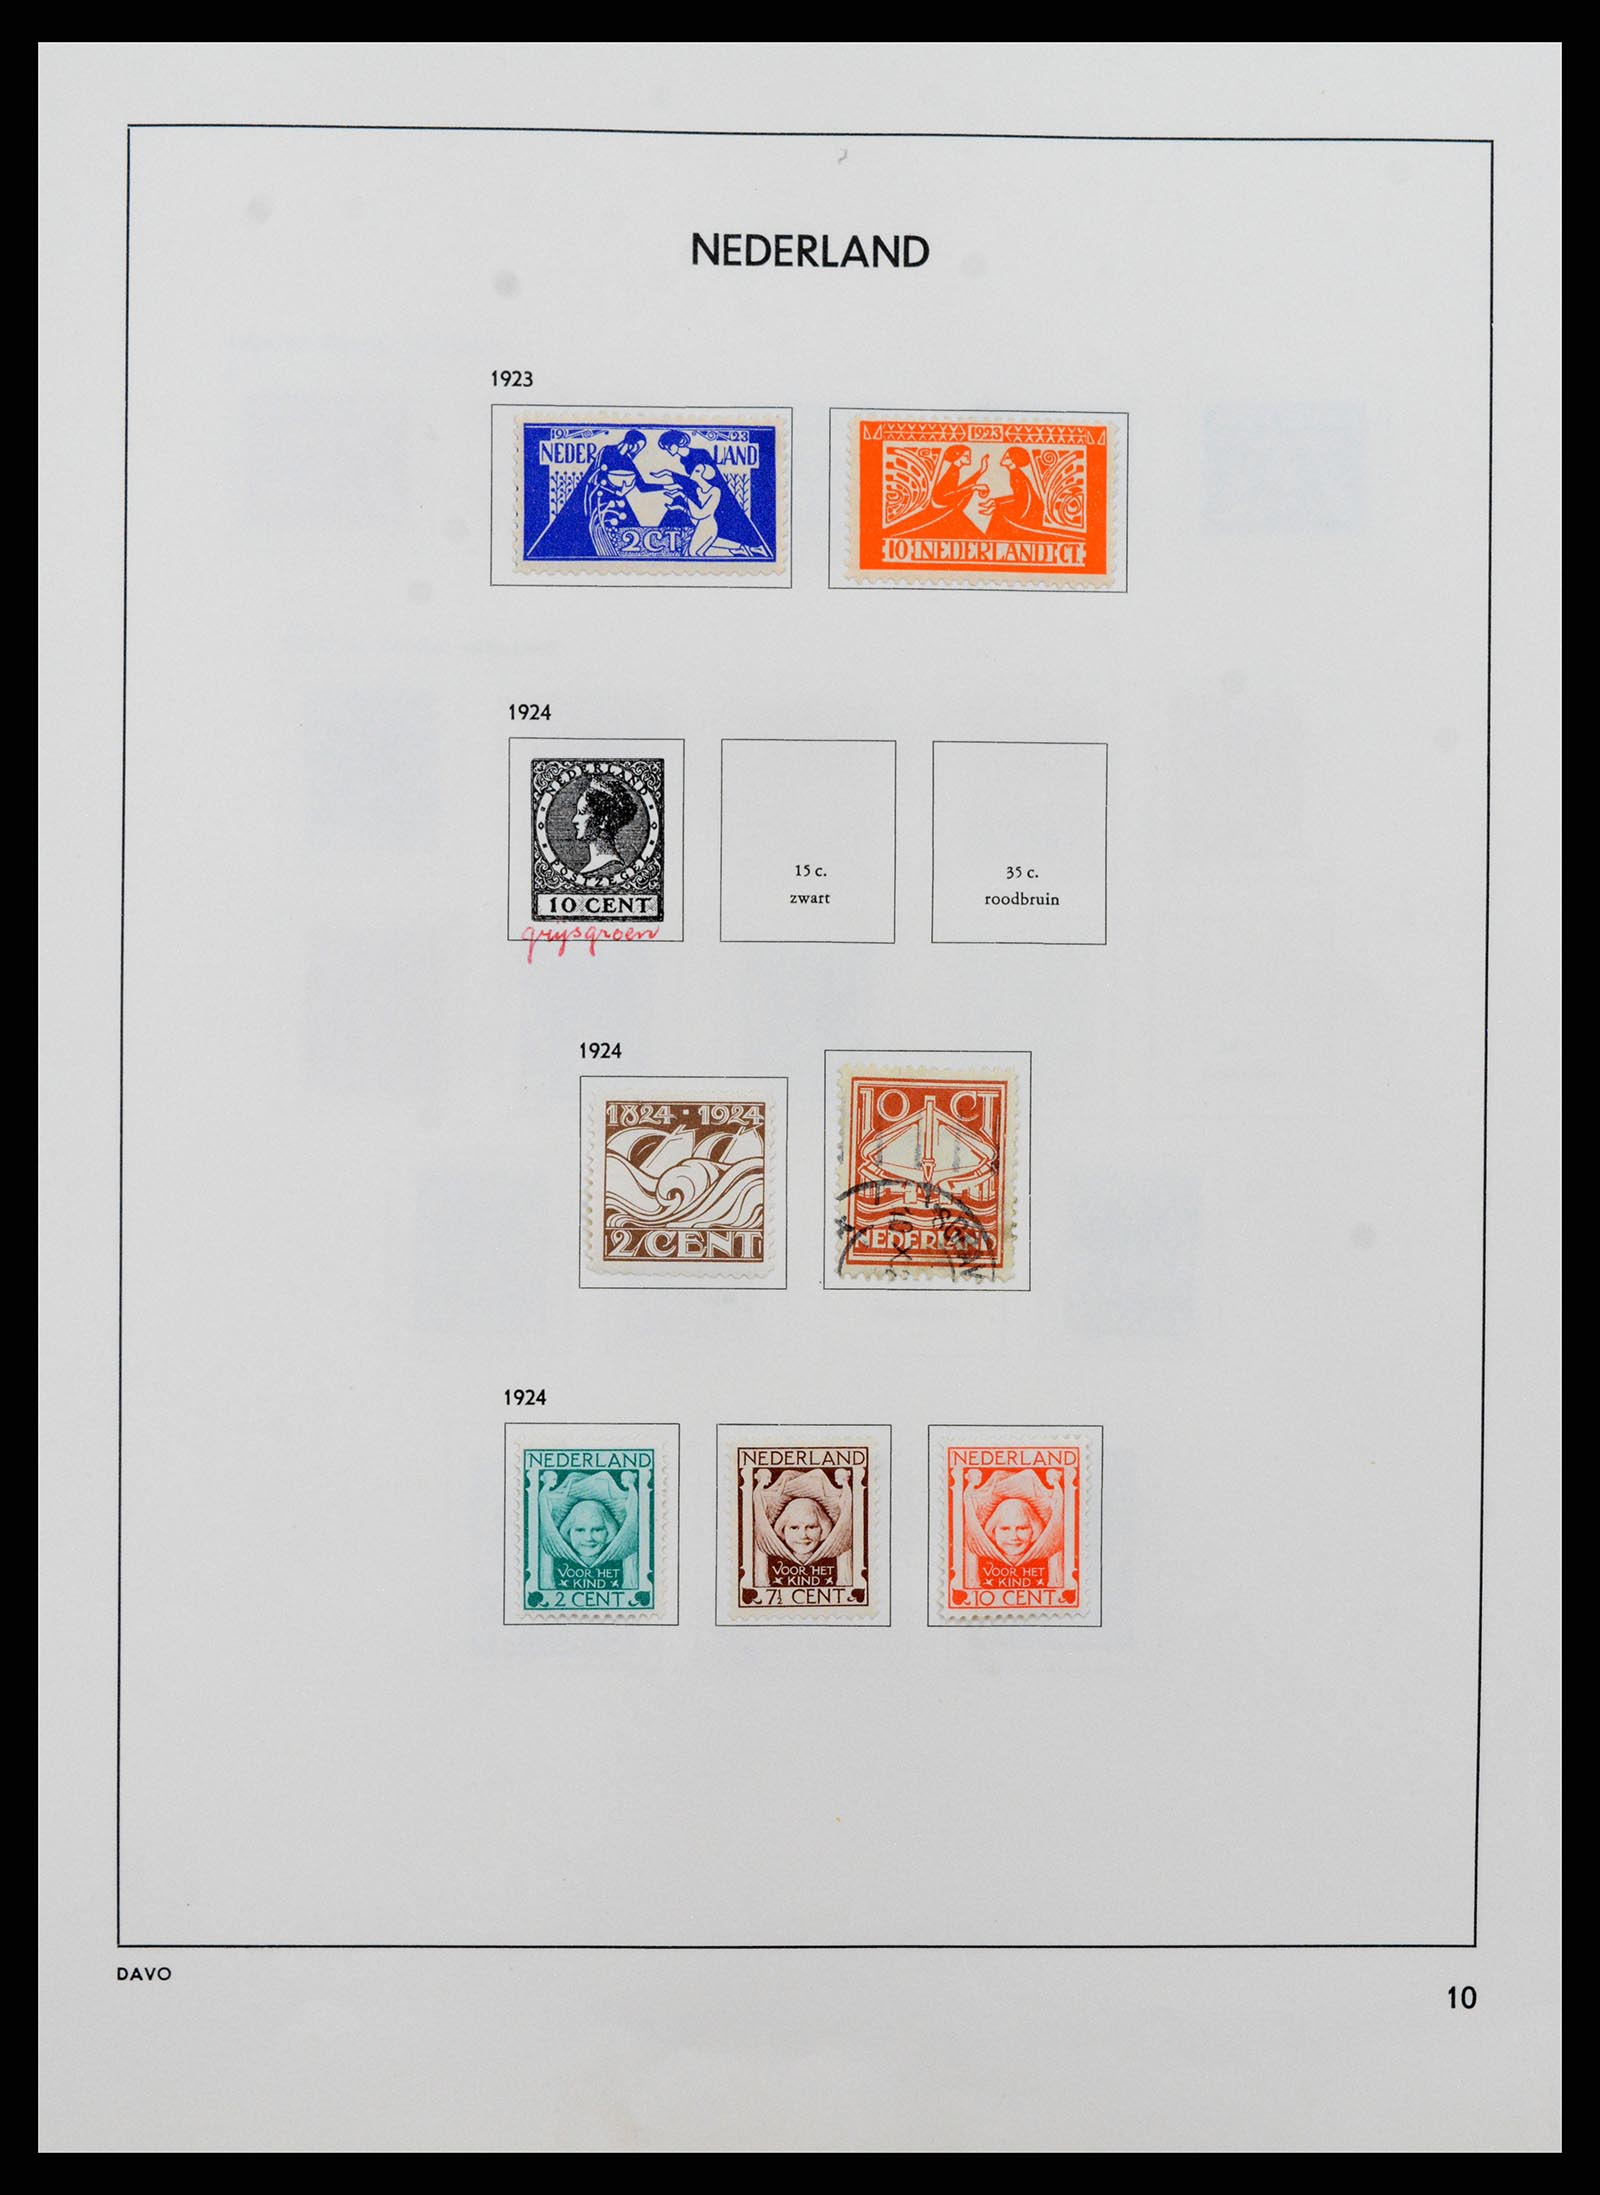 37713 010 - Stamp collection 37713 Netherlands 1864-1980.